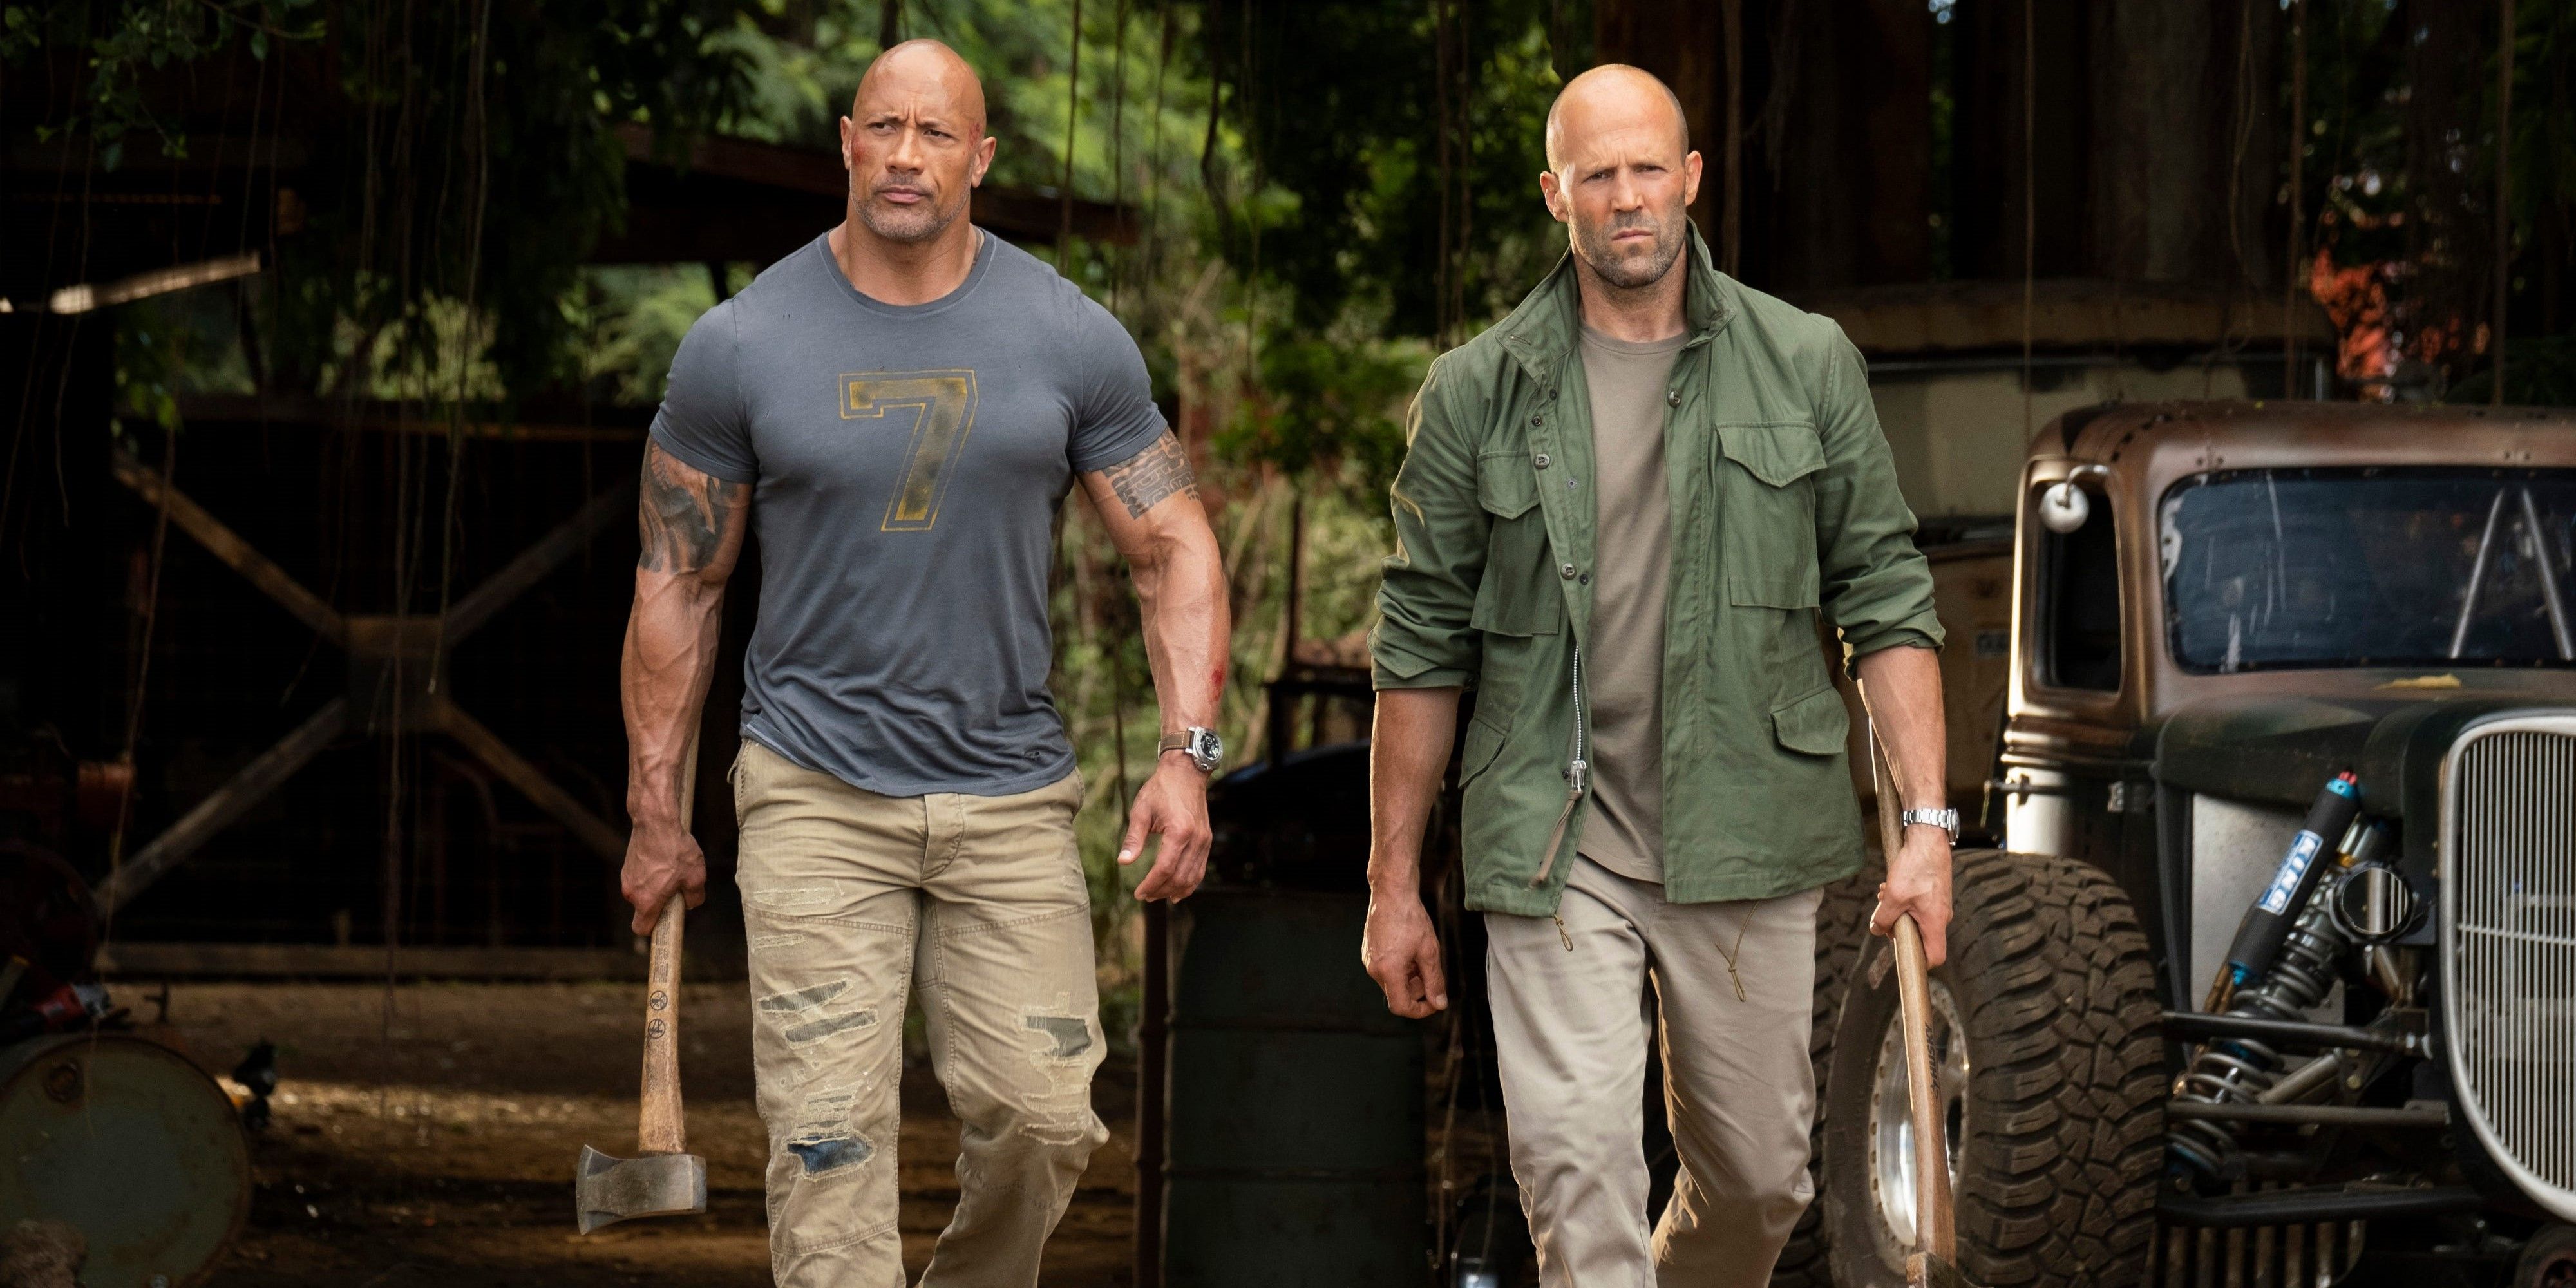 Hobbs and Shaw walk while holding a hammer and a bat, respectively